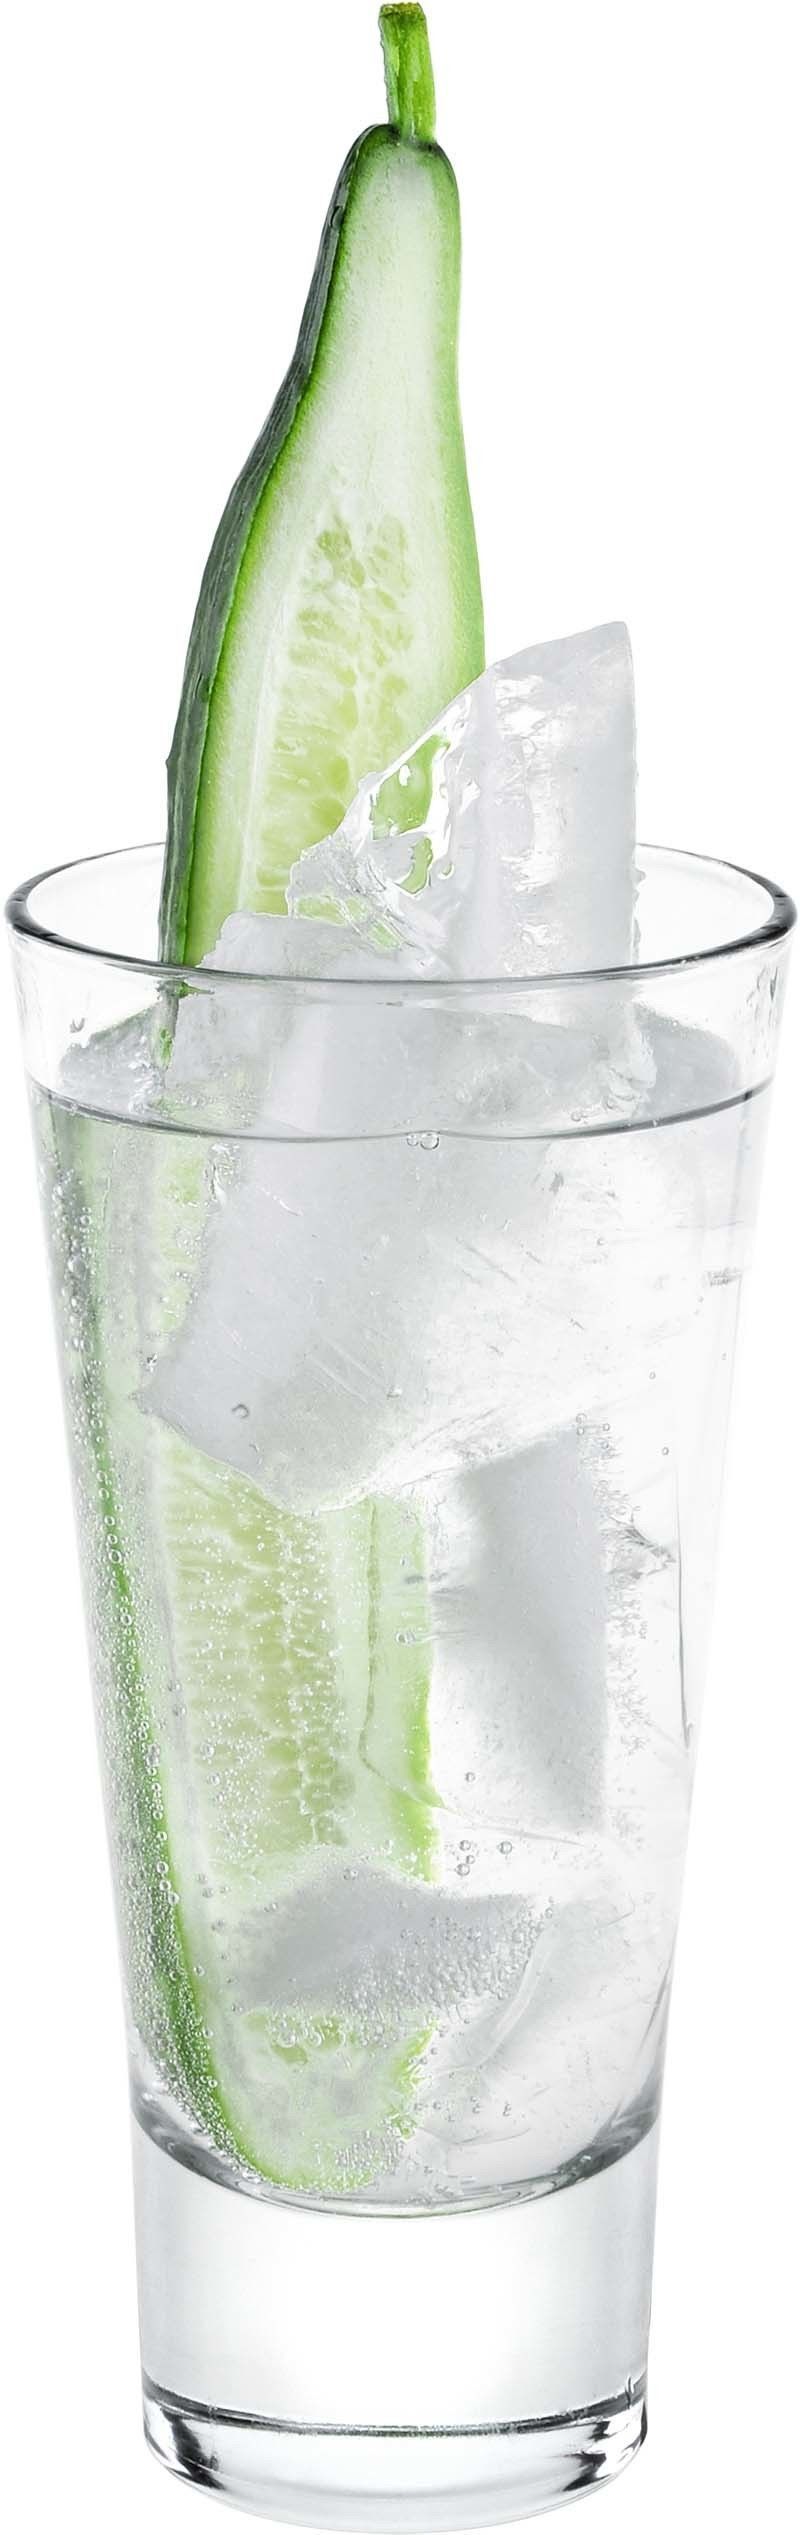 How to Make the Gin and Tonic with Cucumber